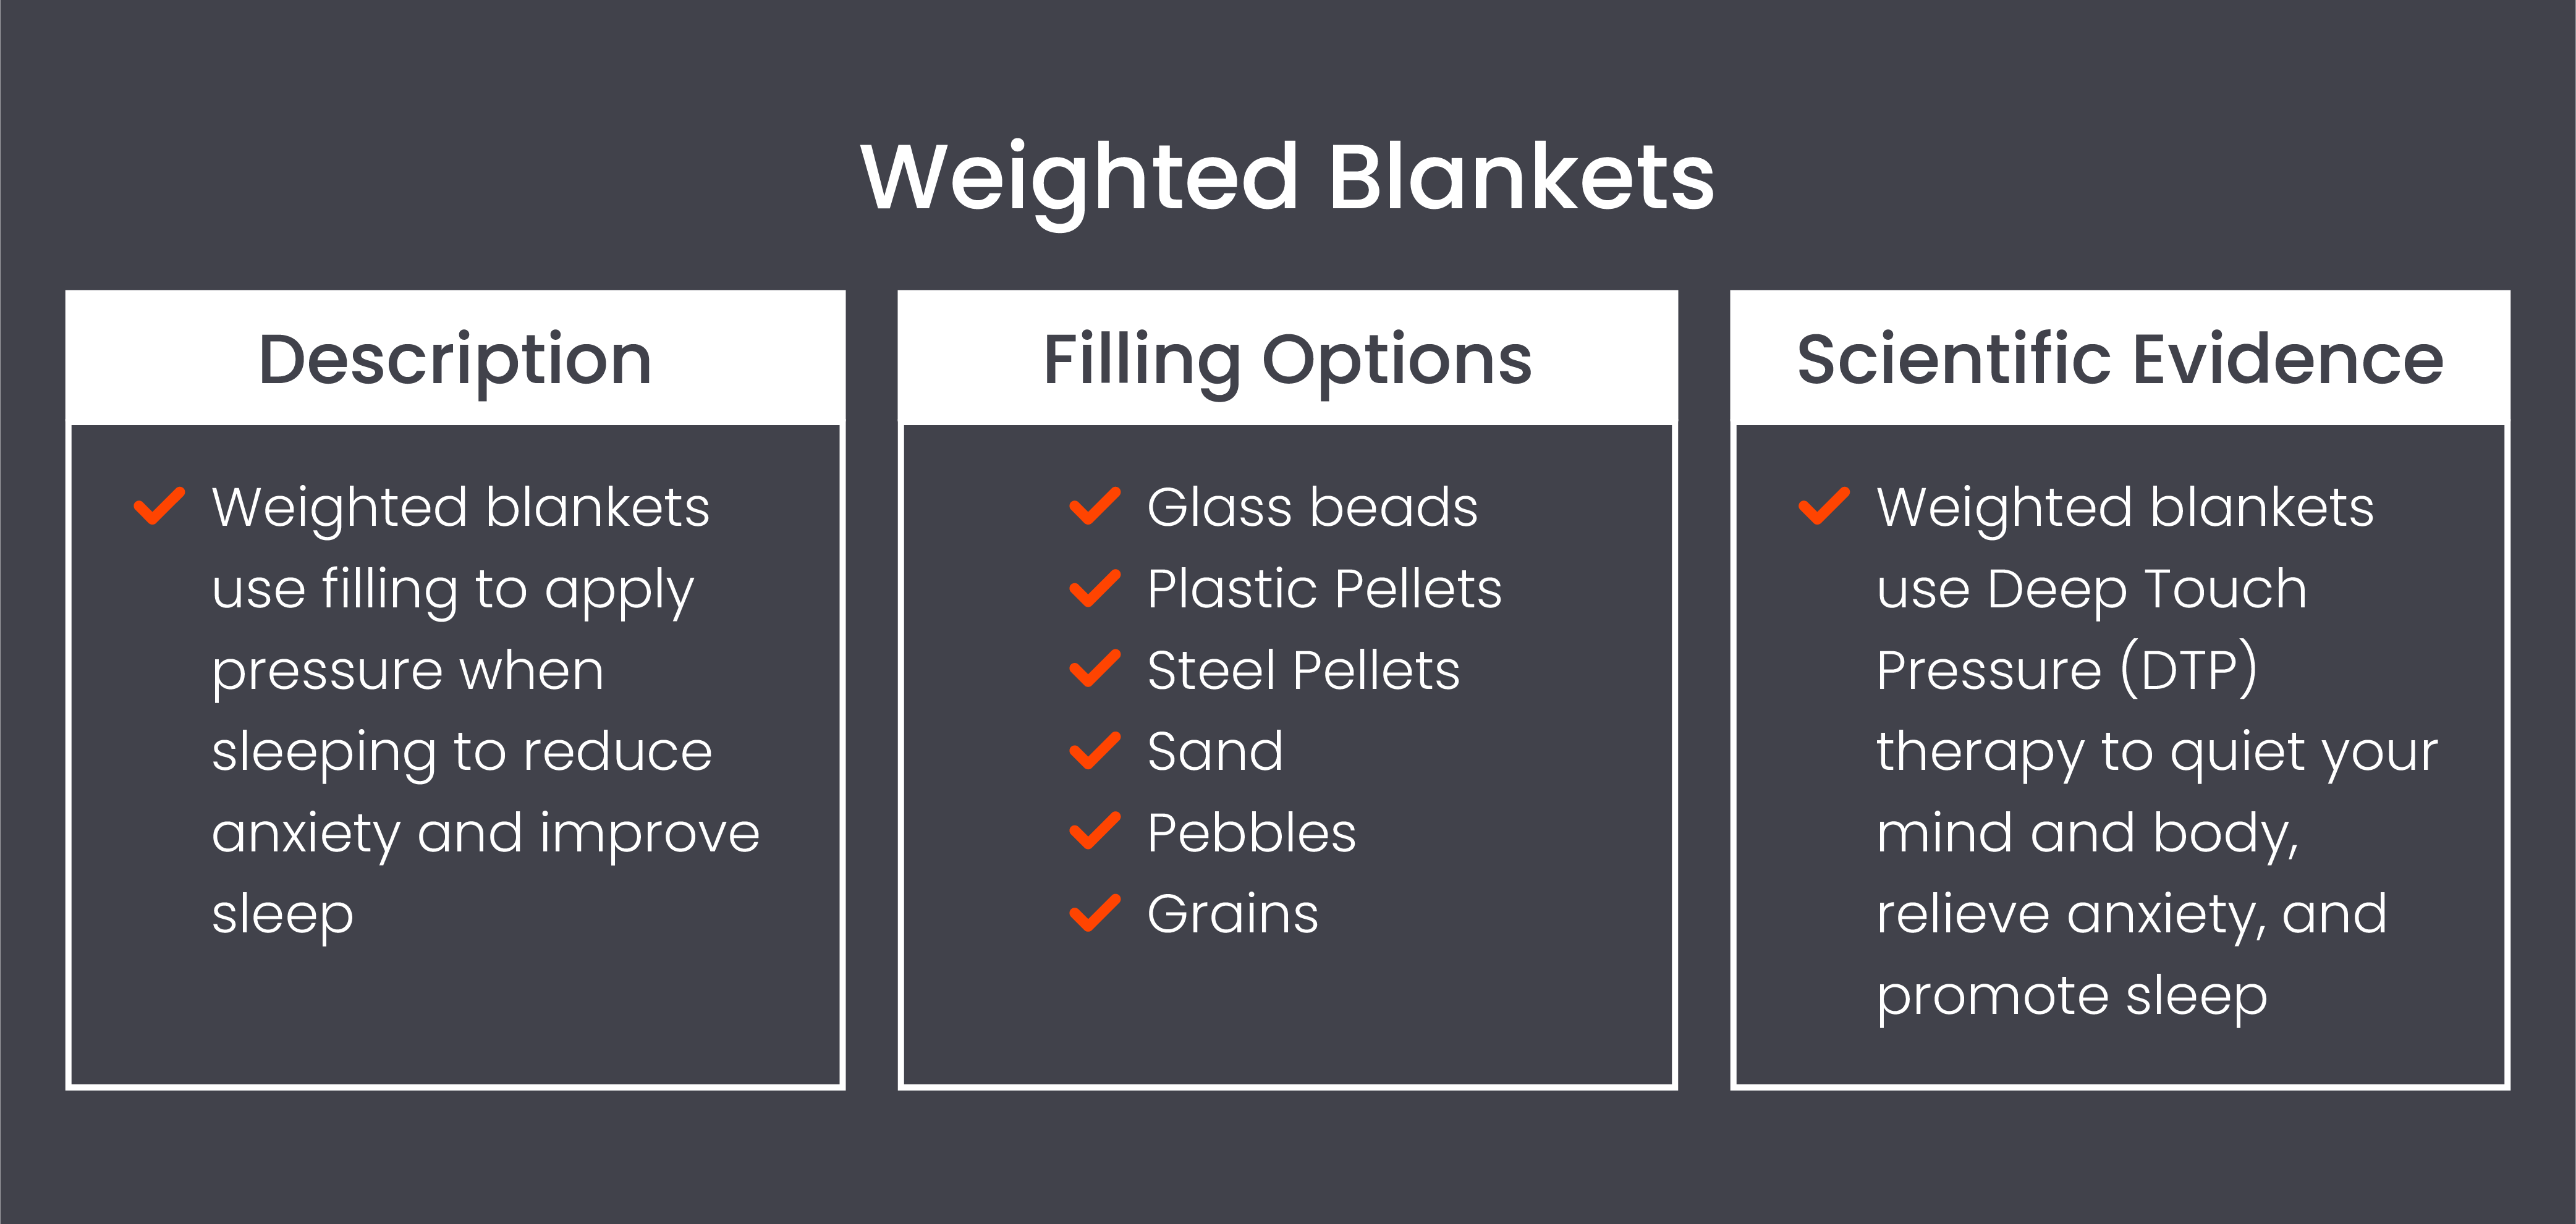 Graphic describing weighted blankets, their fillings, and scientific evidence to support their use